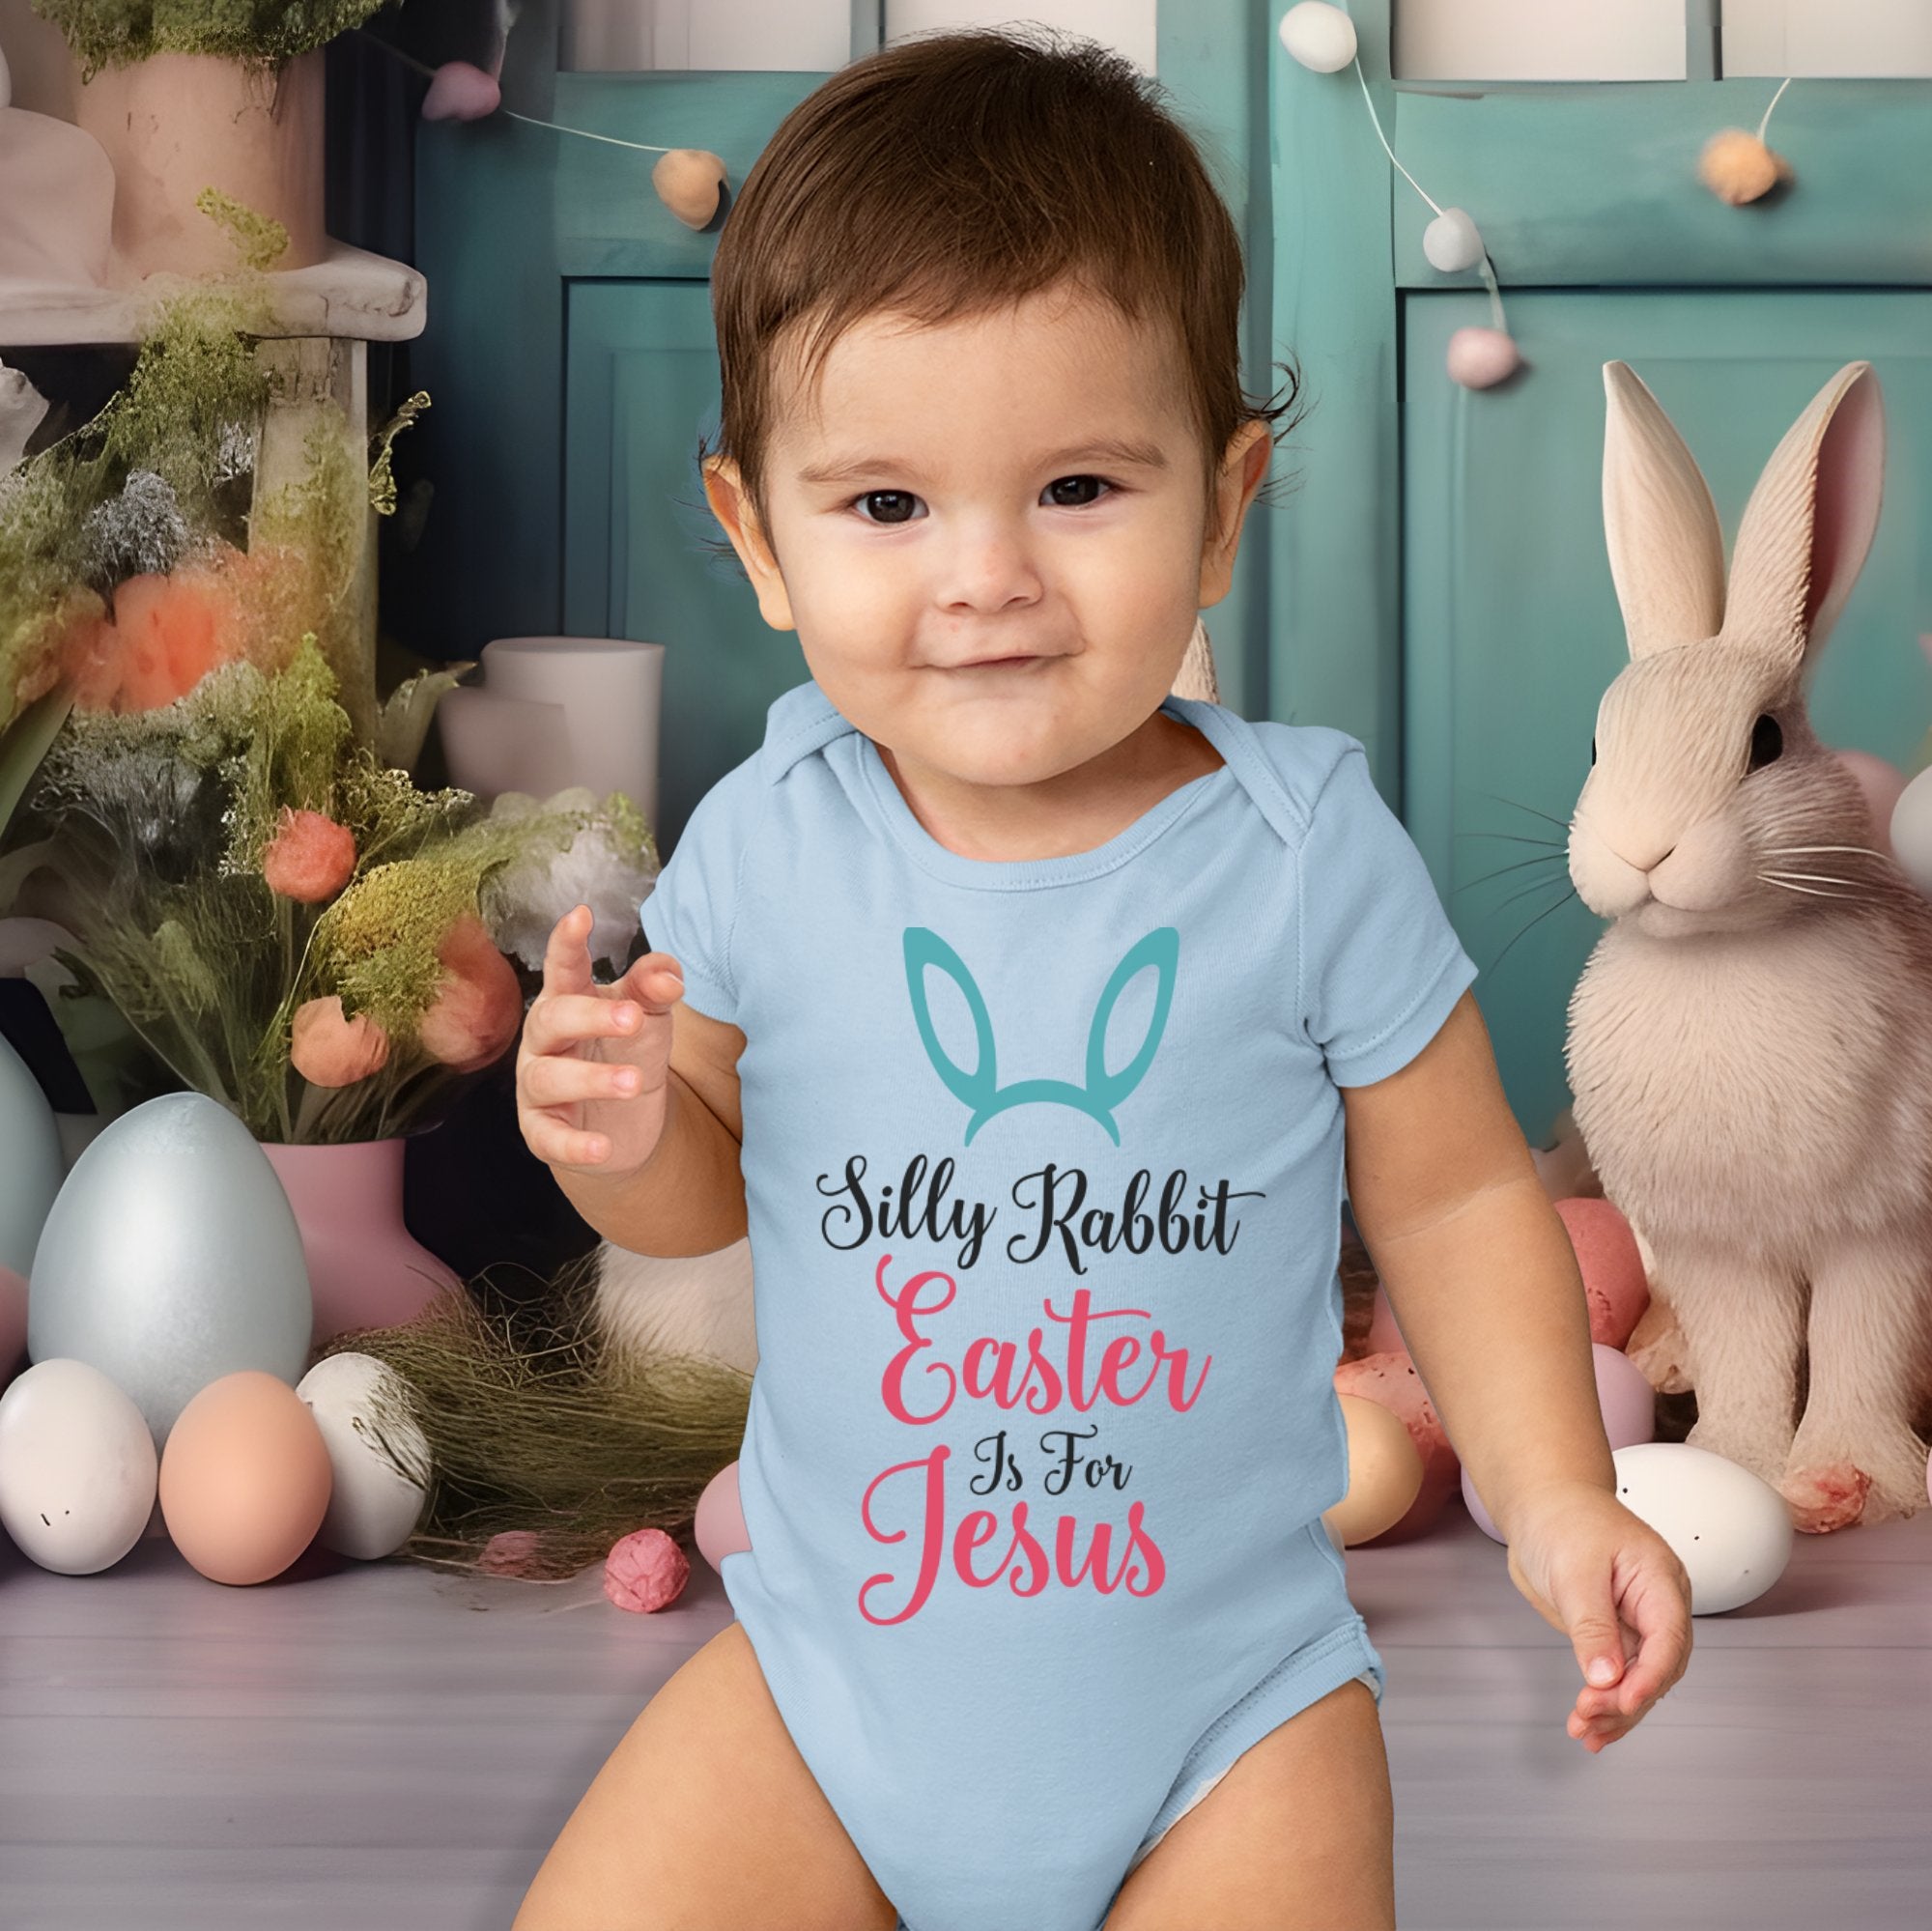 Easter Silly Rabbit For Jesus Infant Fine Jersey Bodysuit Size: 6mo Color: White Jesus Passion Apparel